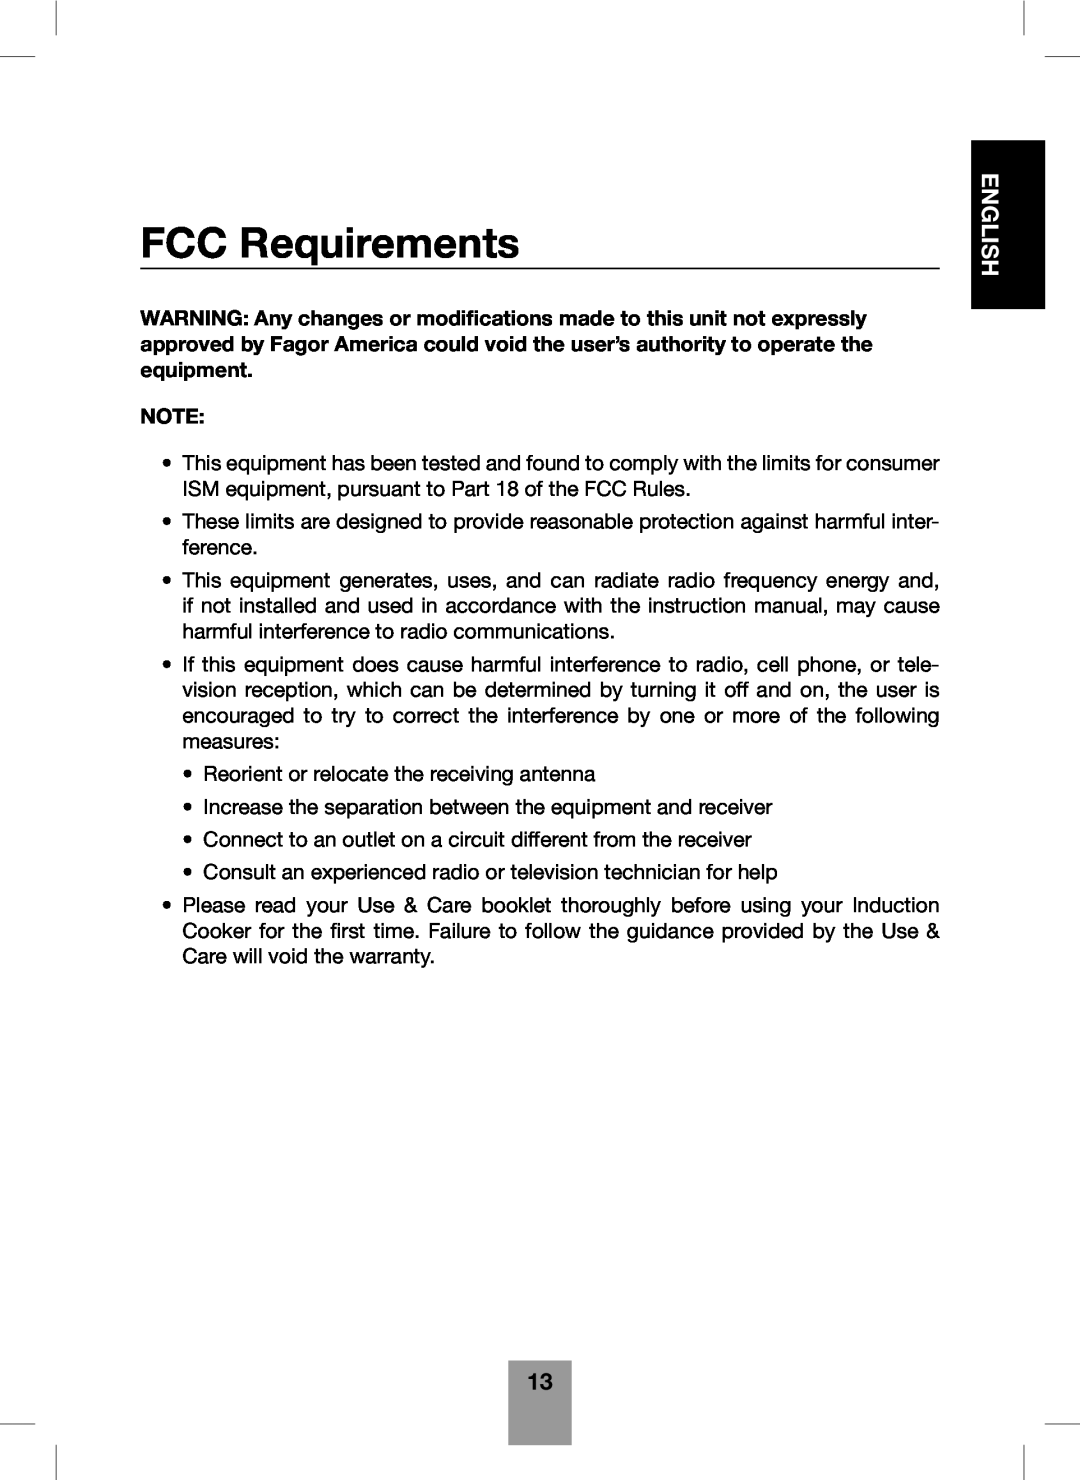 Fagor America Portable Induction Cooktop user manual FCC Requirements, English 